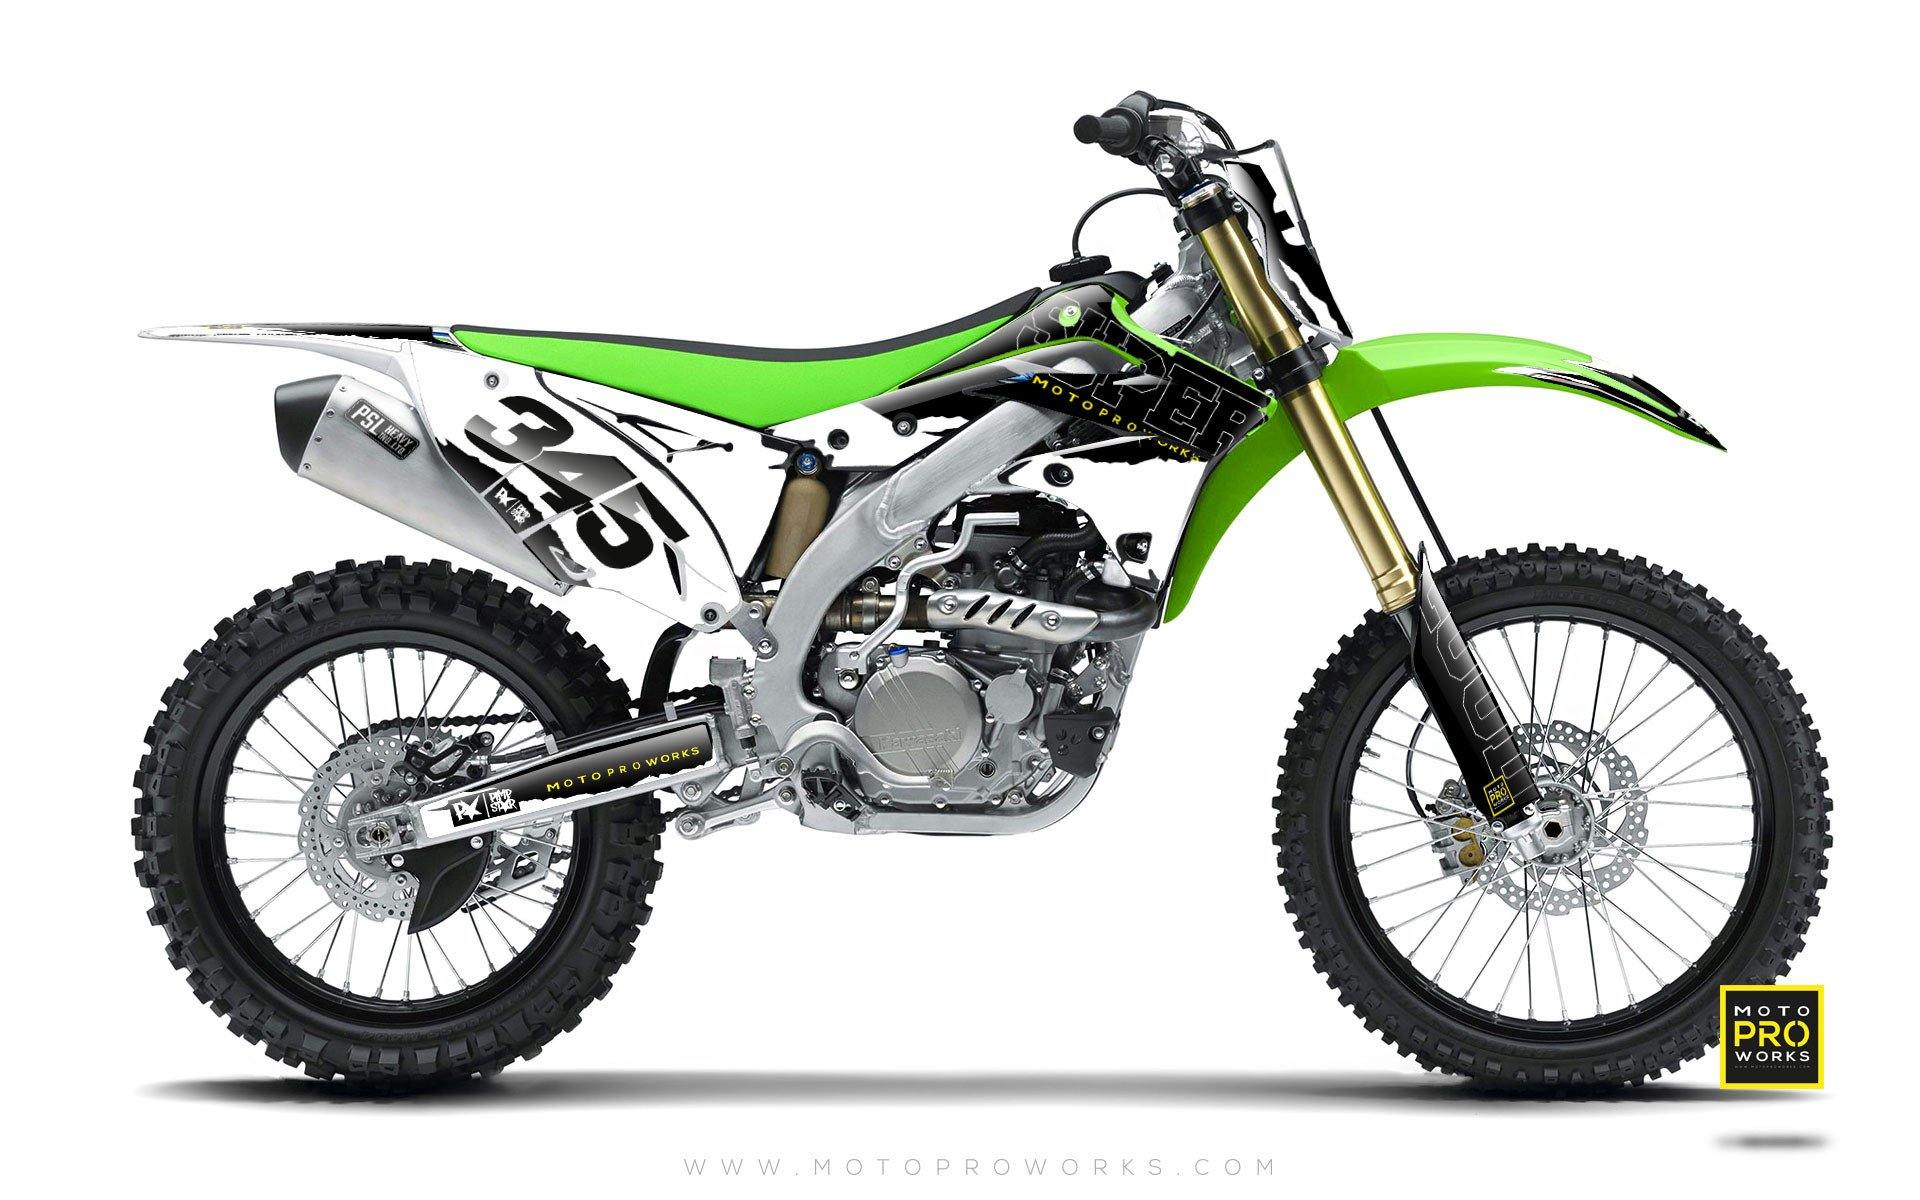 Kawasaki GRAPHIC KIT - "SCRATCHY" - MotoProWorks | Decals and Bike Graphic kit